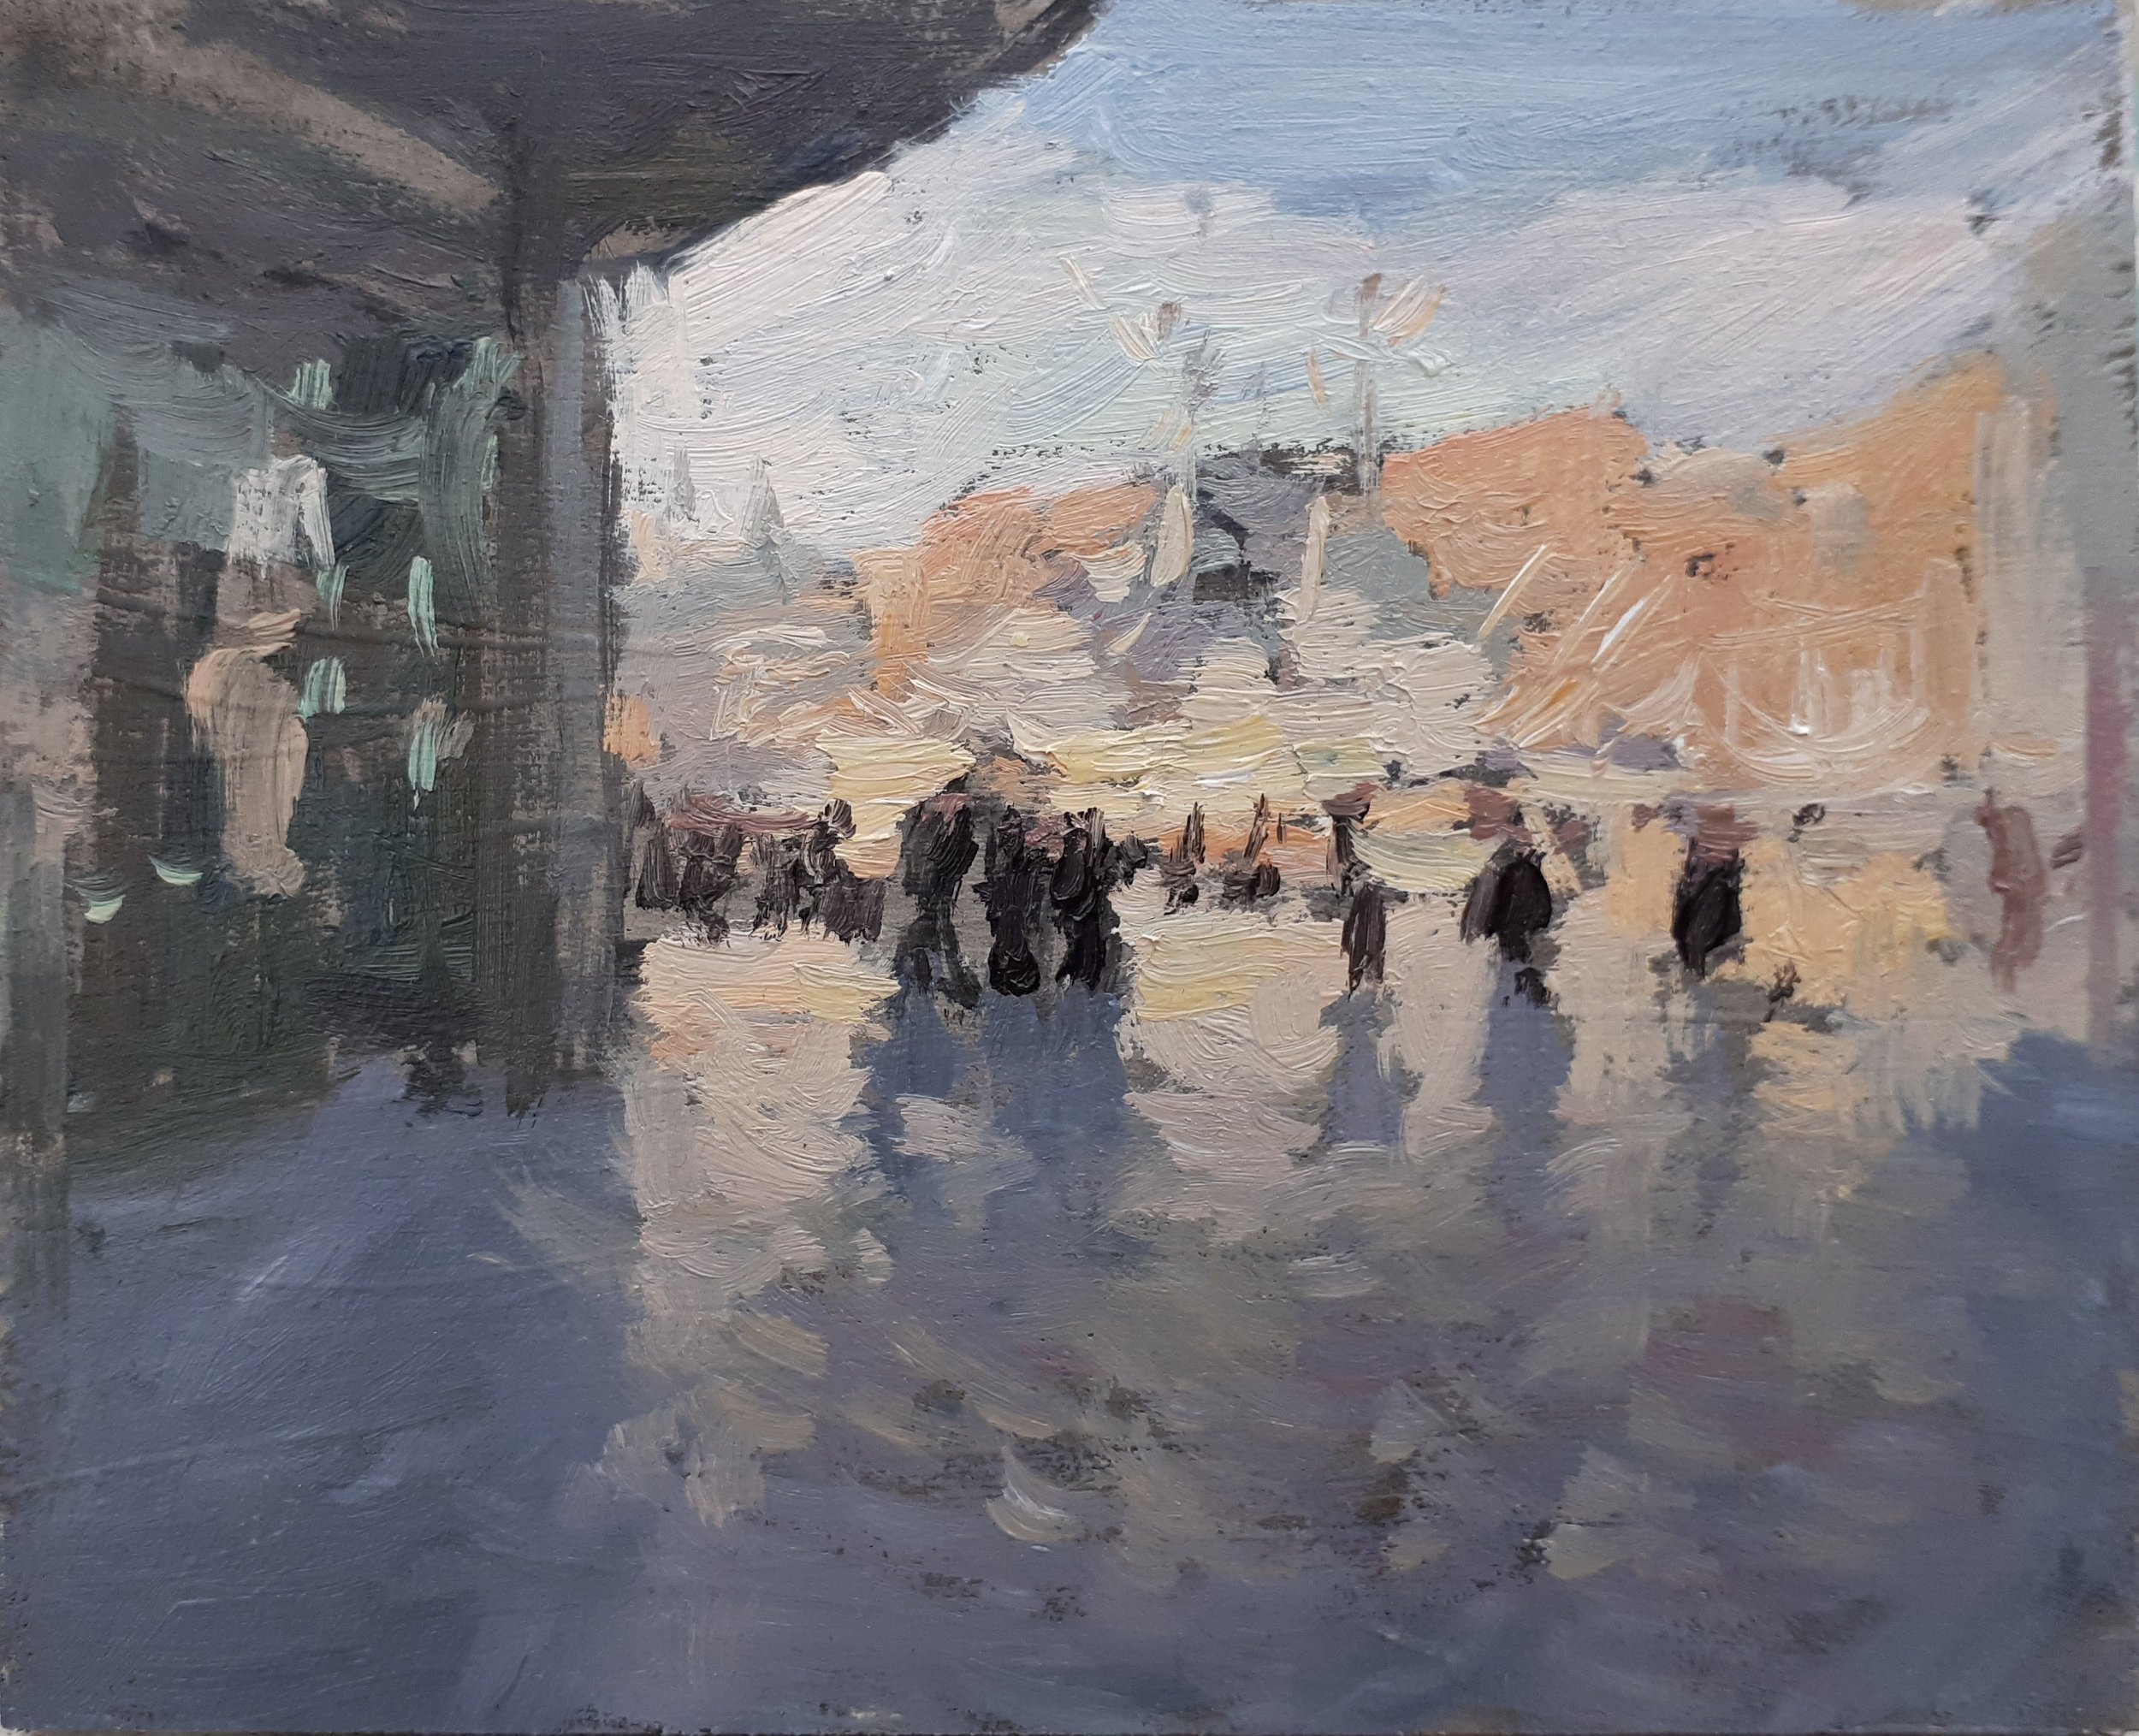 -Reflections on the Southbank- Max White, 4 x 5 Inches - Oil on panel - £50-min.jpg